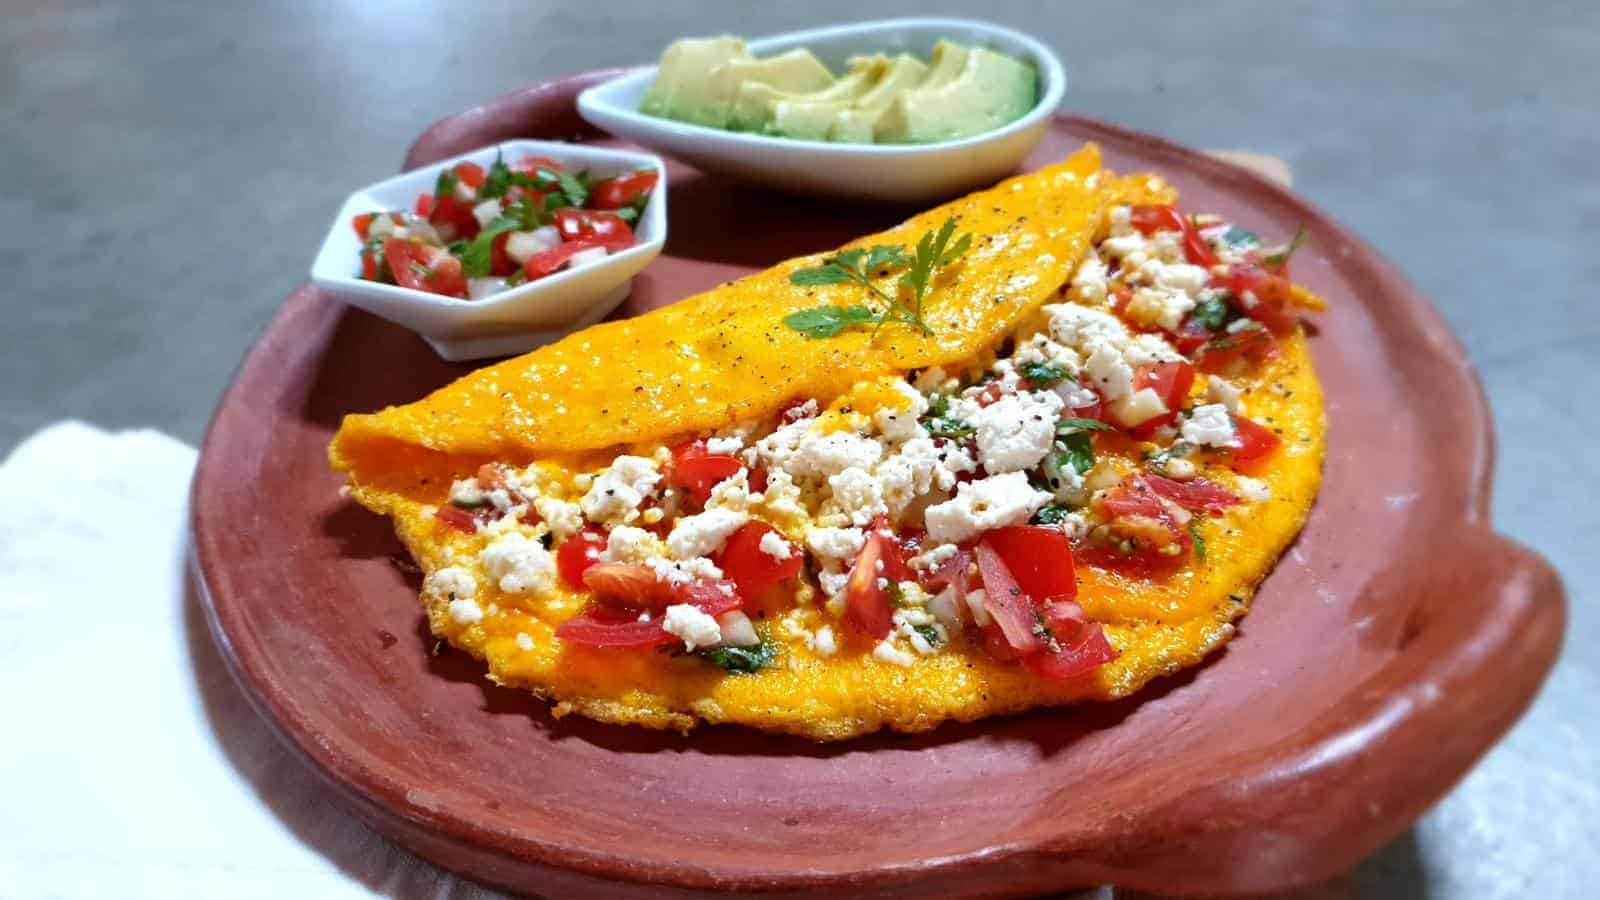 A plate of Mexican omelette with with queso fresco and salsa.